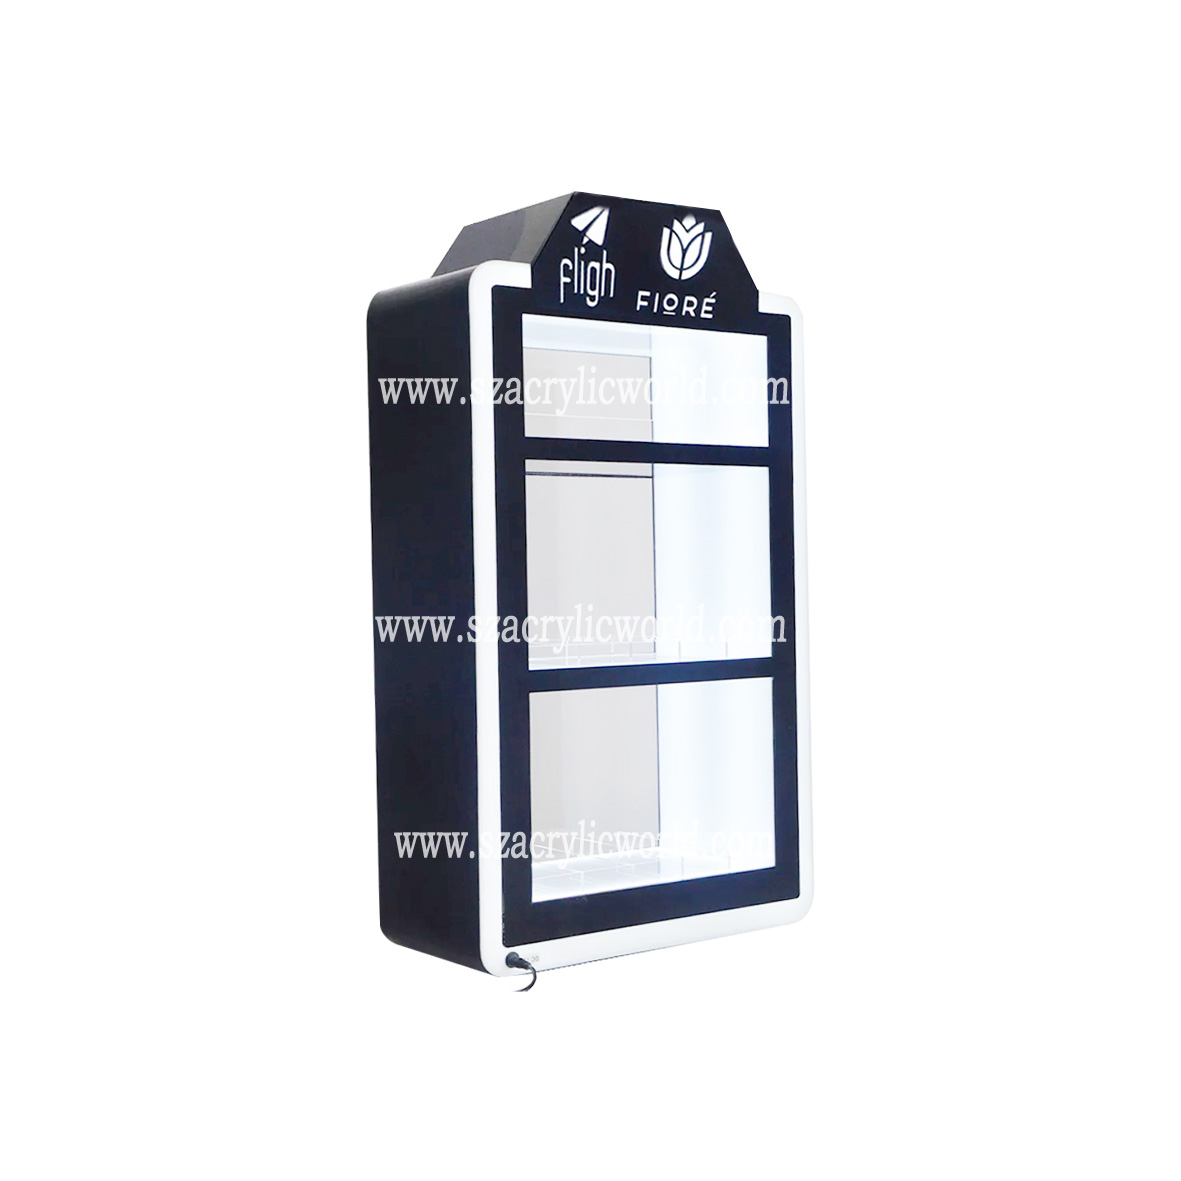 Custom display cabinets for electronic cigarettes and cigarettes